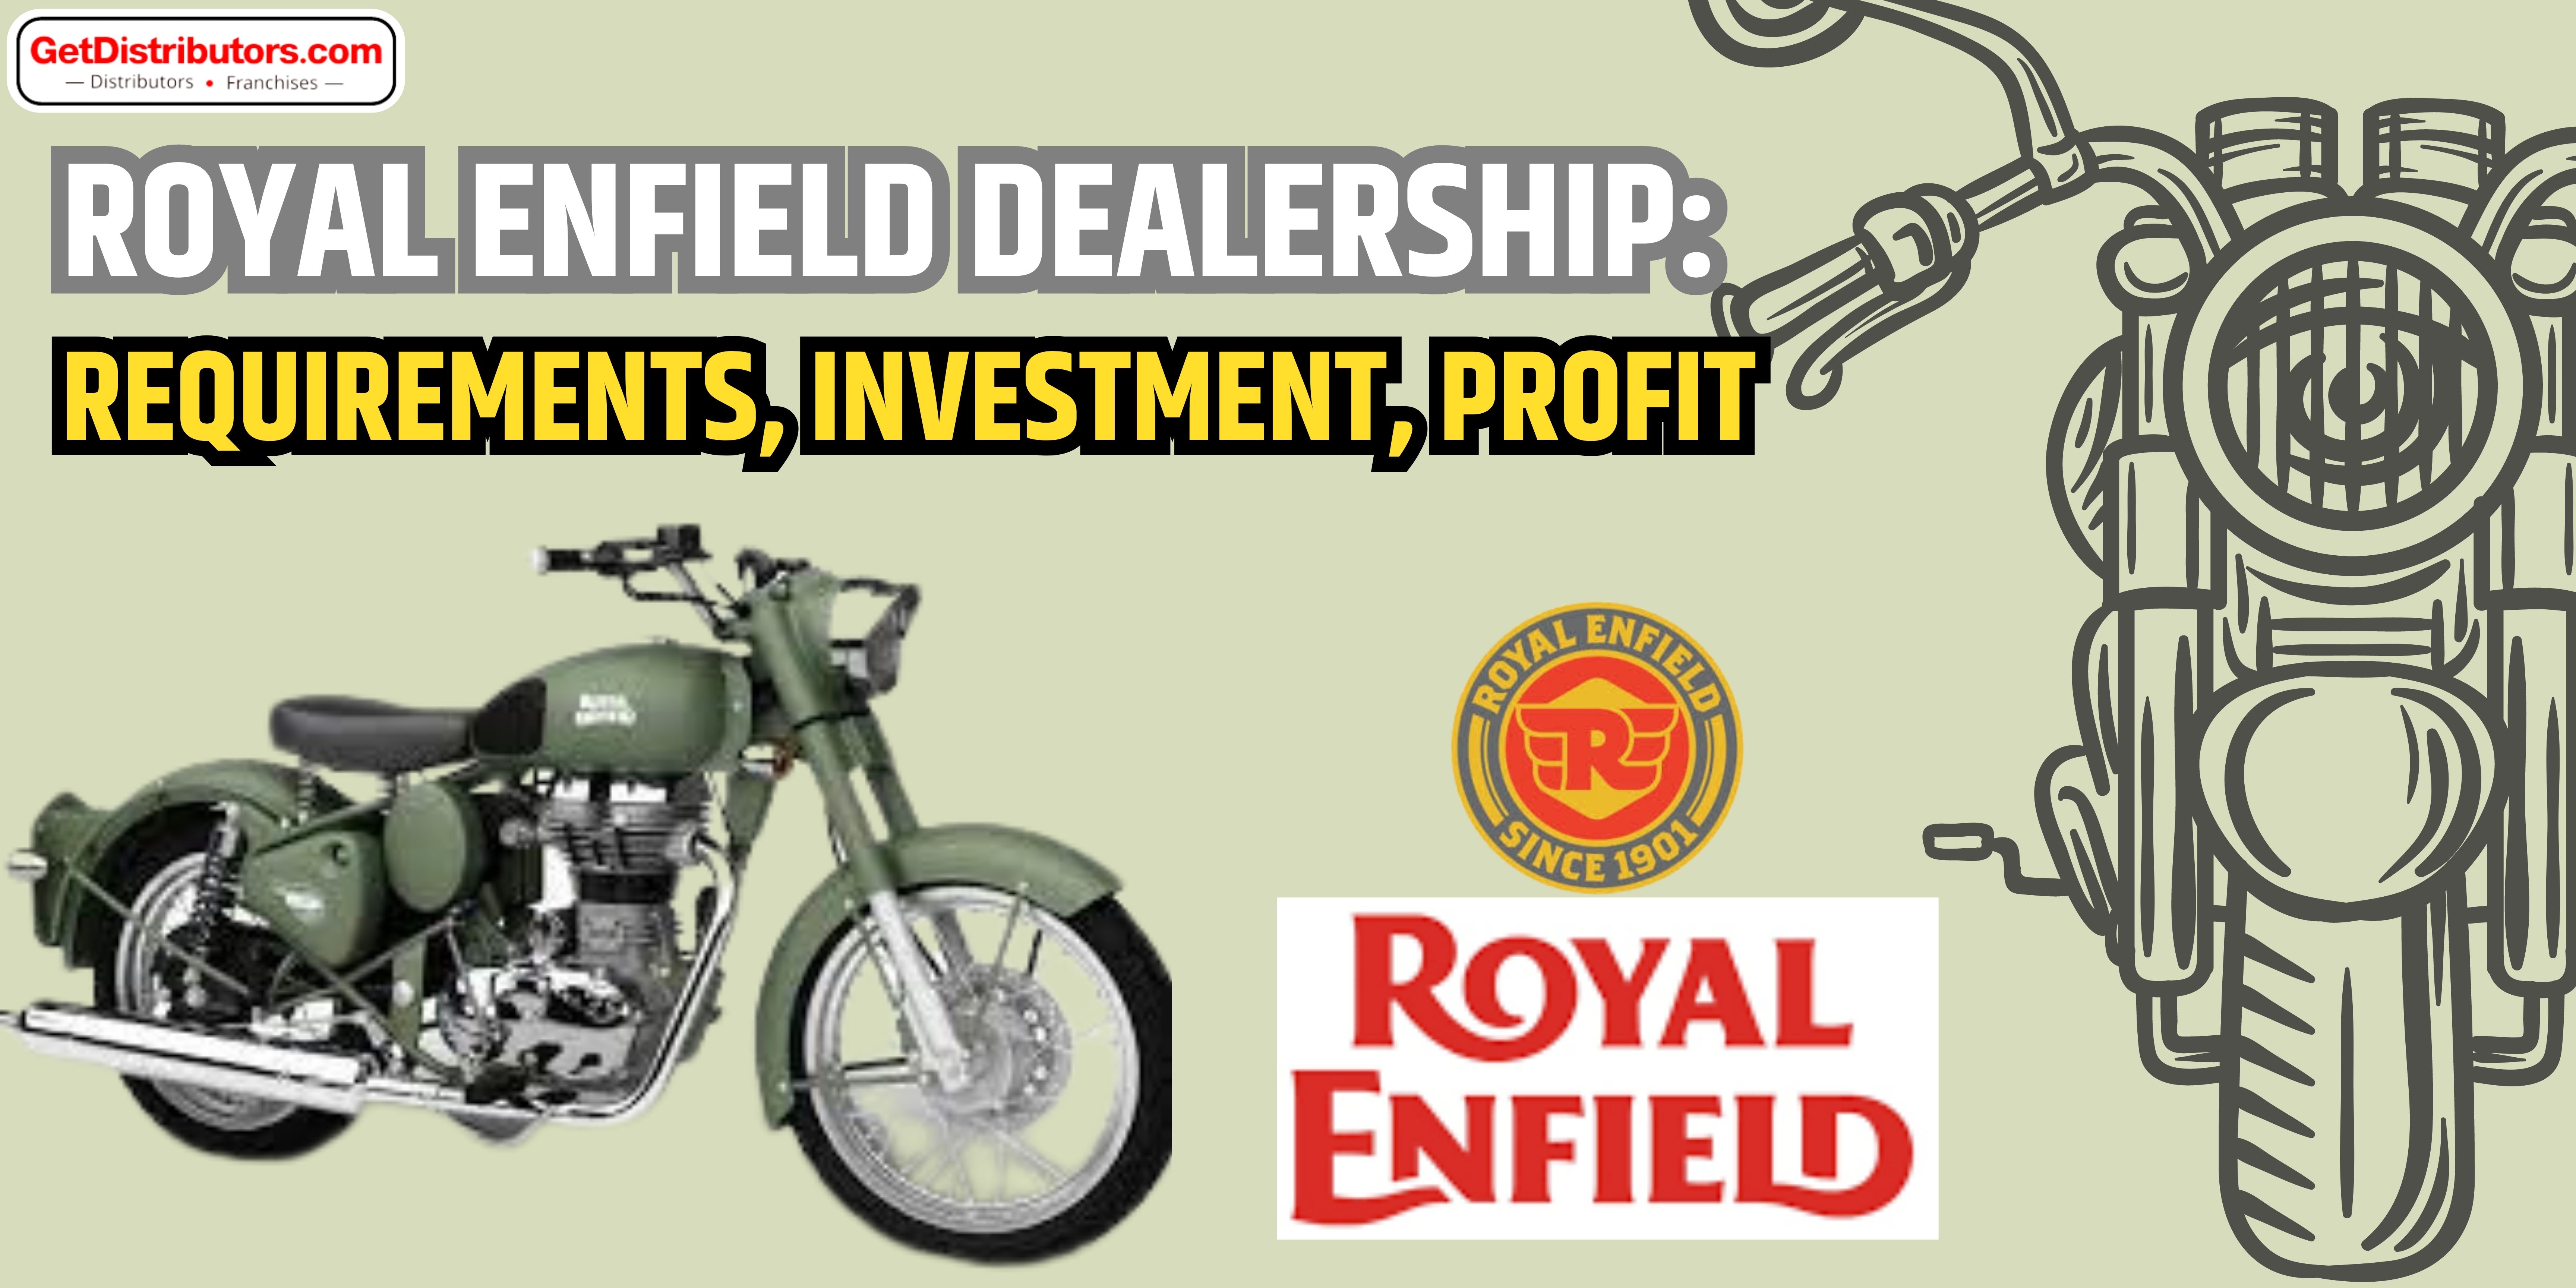 How to Get Royal Enfield Dealership: Requirements, Investment, Profit